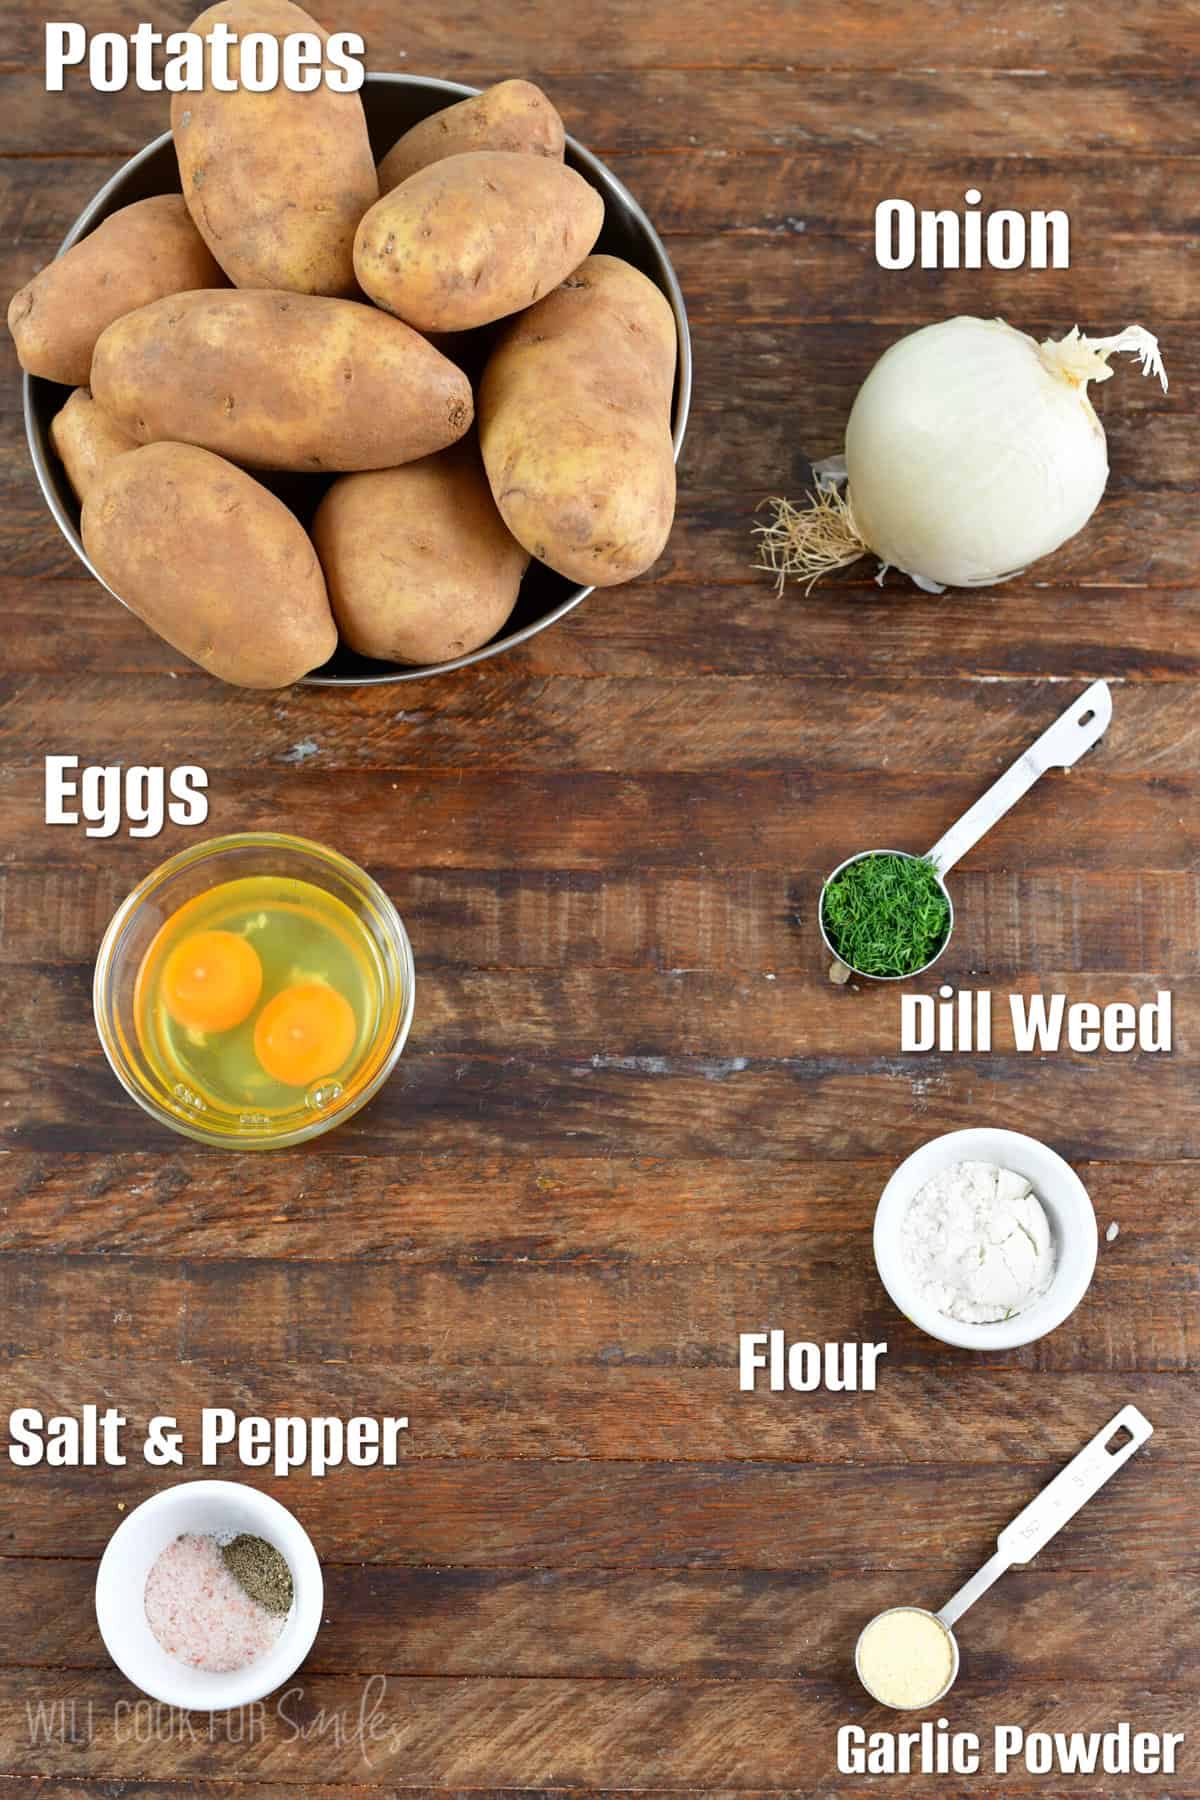 Labeled ingredients for potato pancakes on a wood surface.